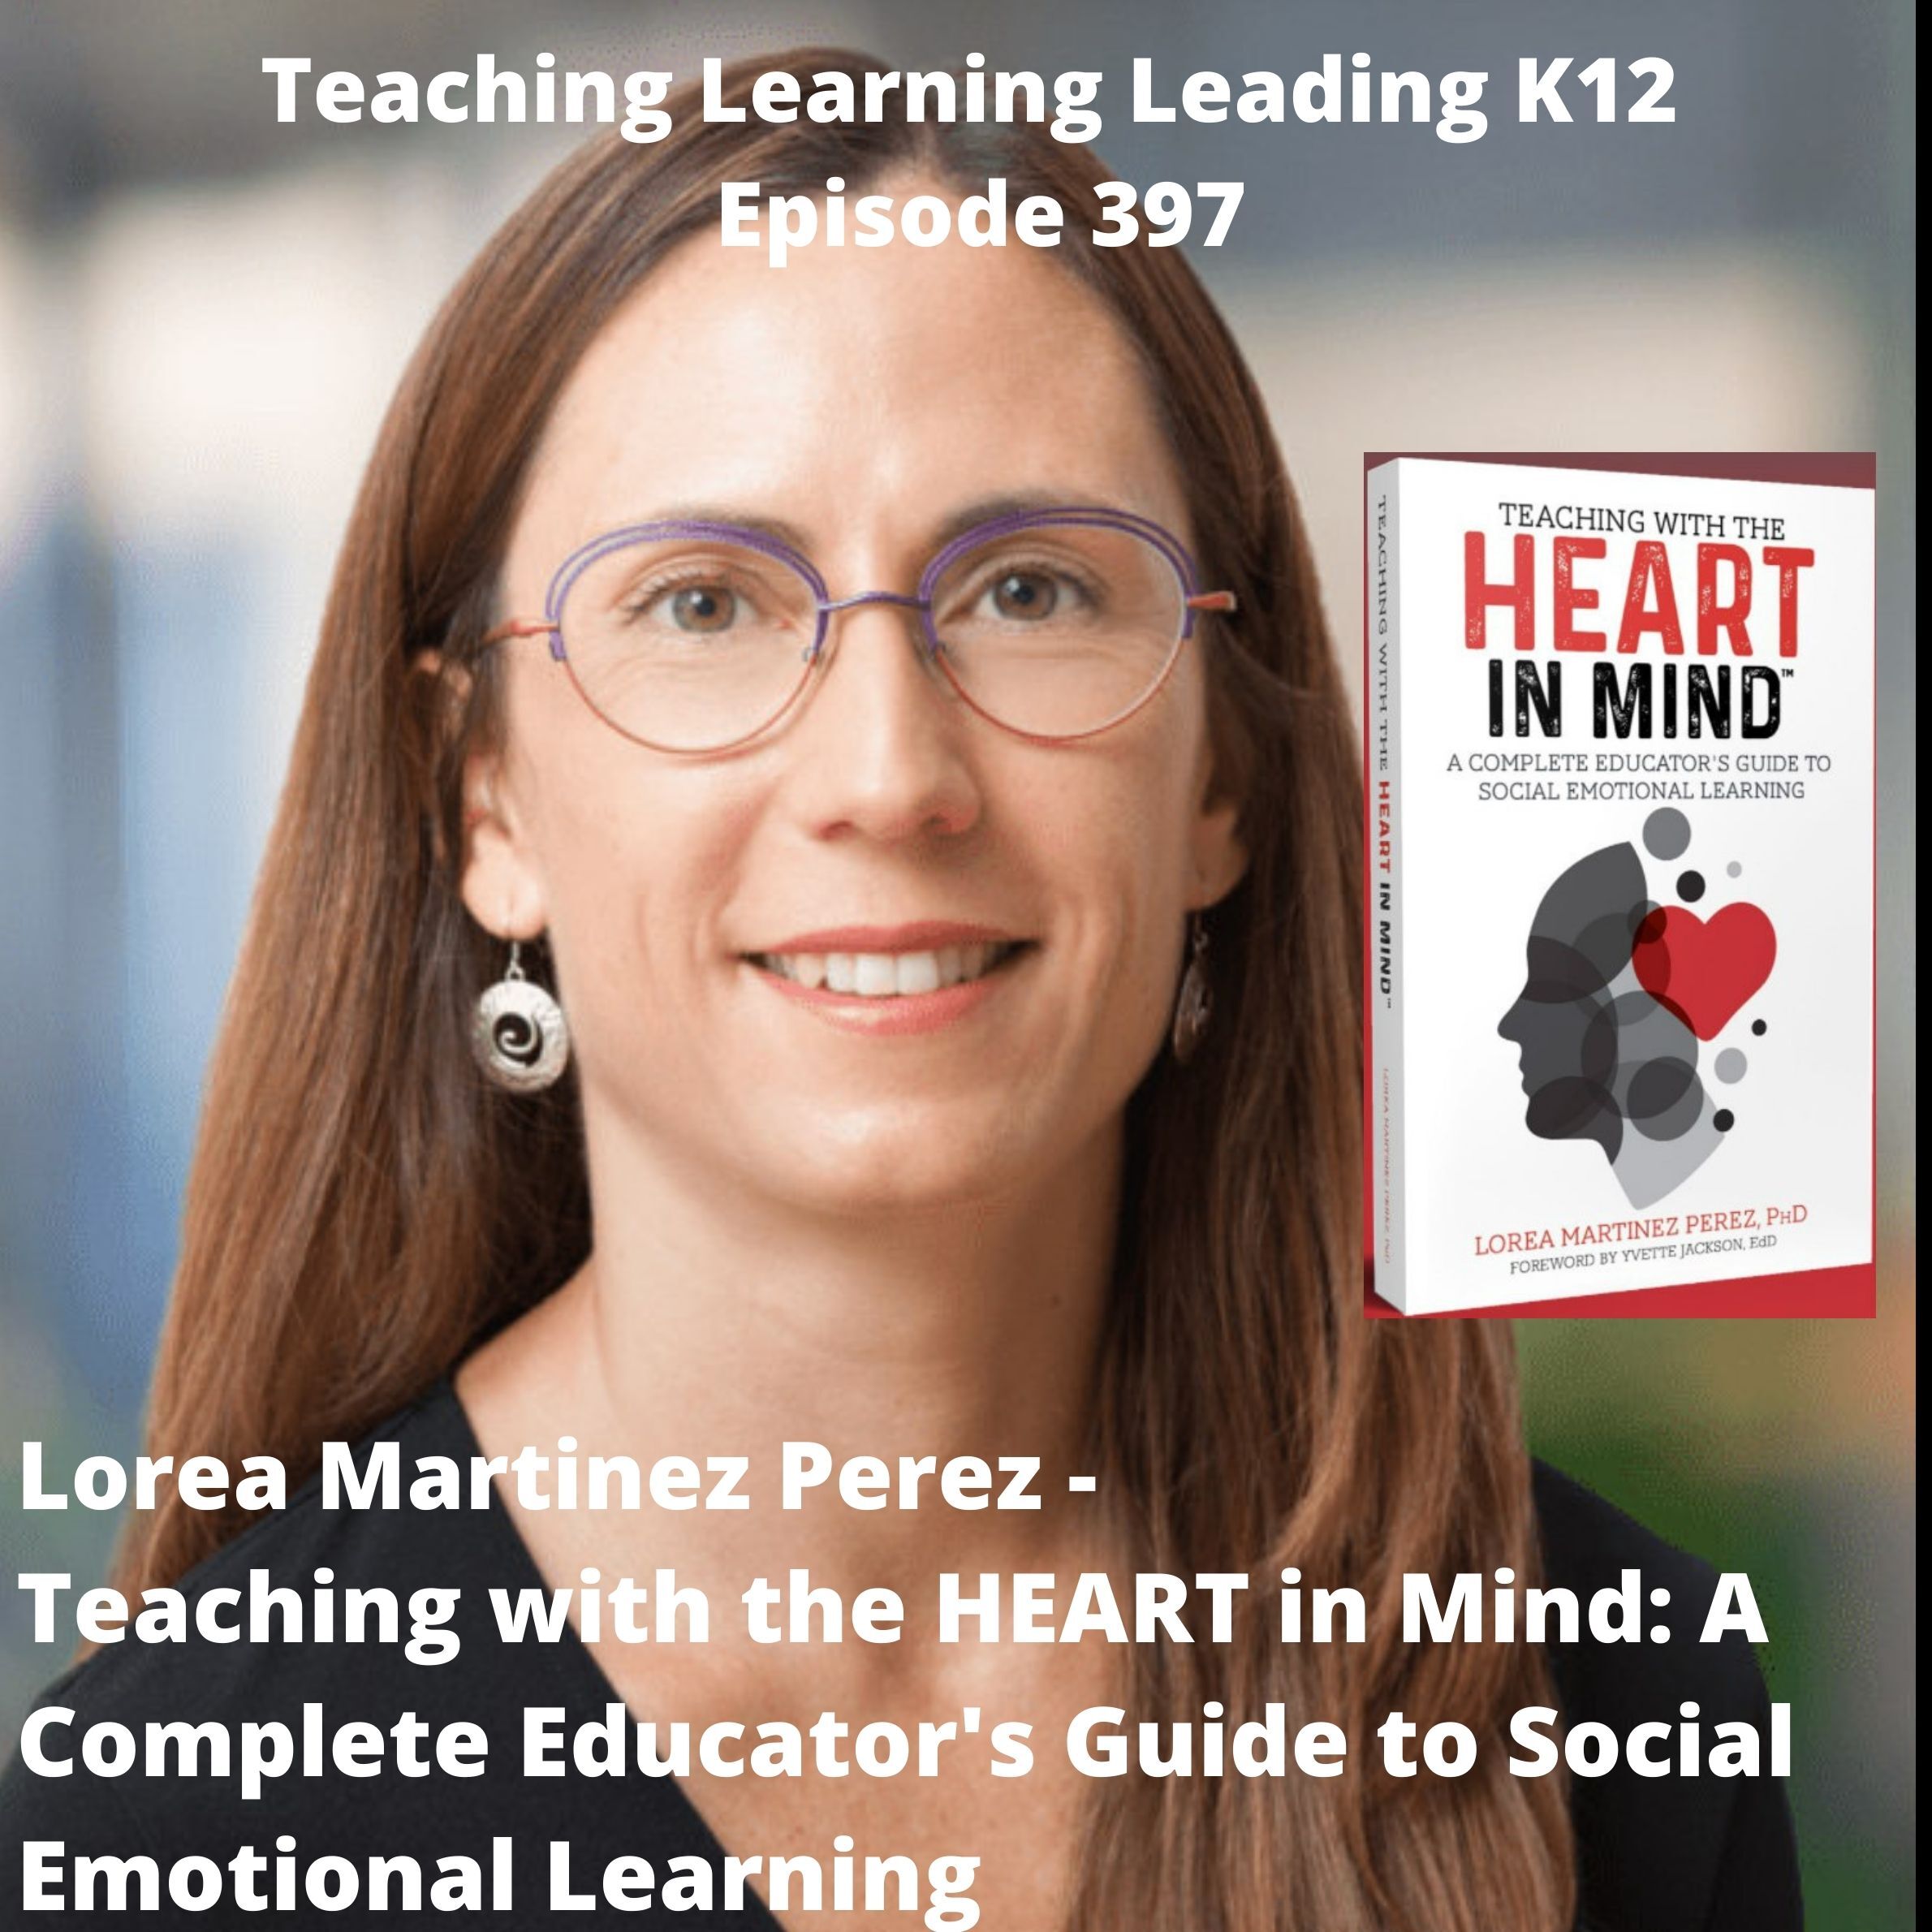 Lorea Martinez Perez - Teaching with the HEART in Mind: A Complete Educator's Guide to Social Emotional Learning - 397 Image